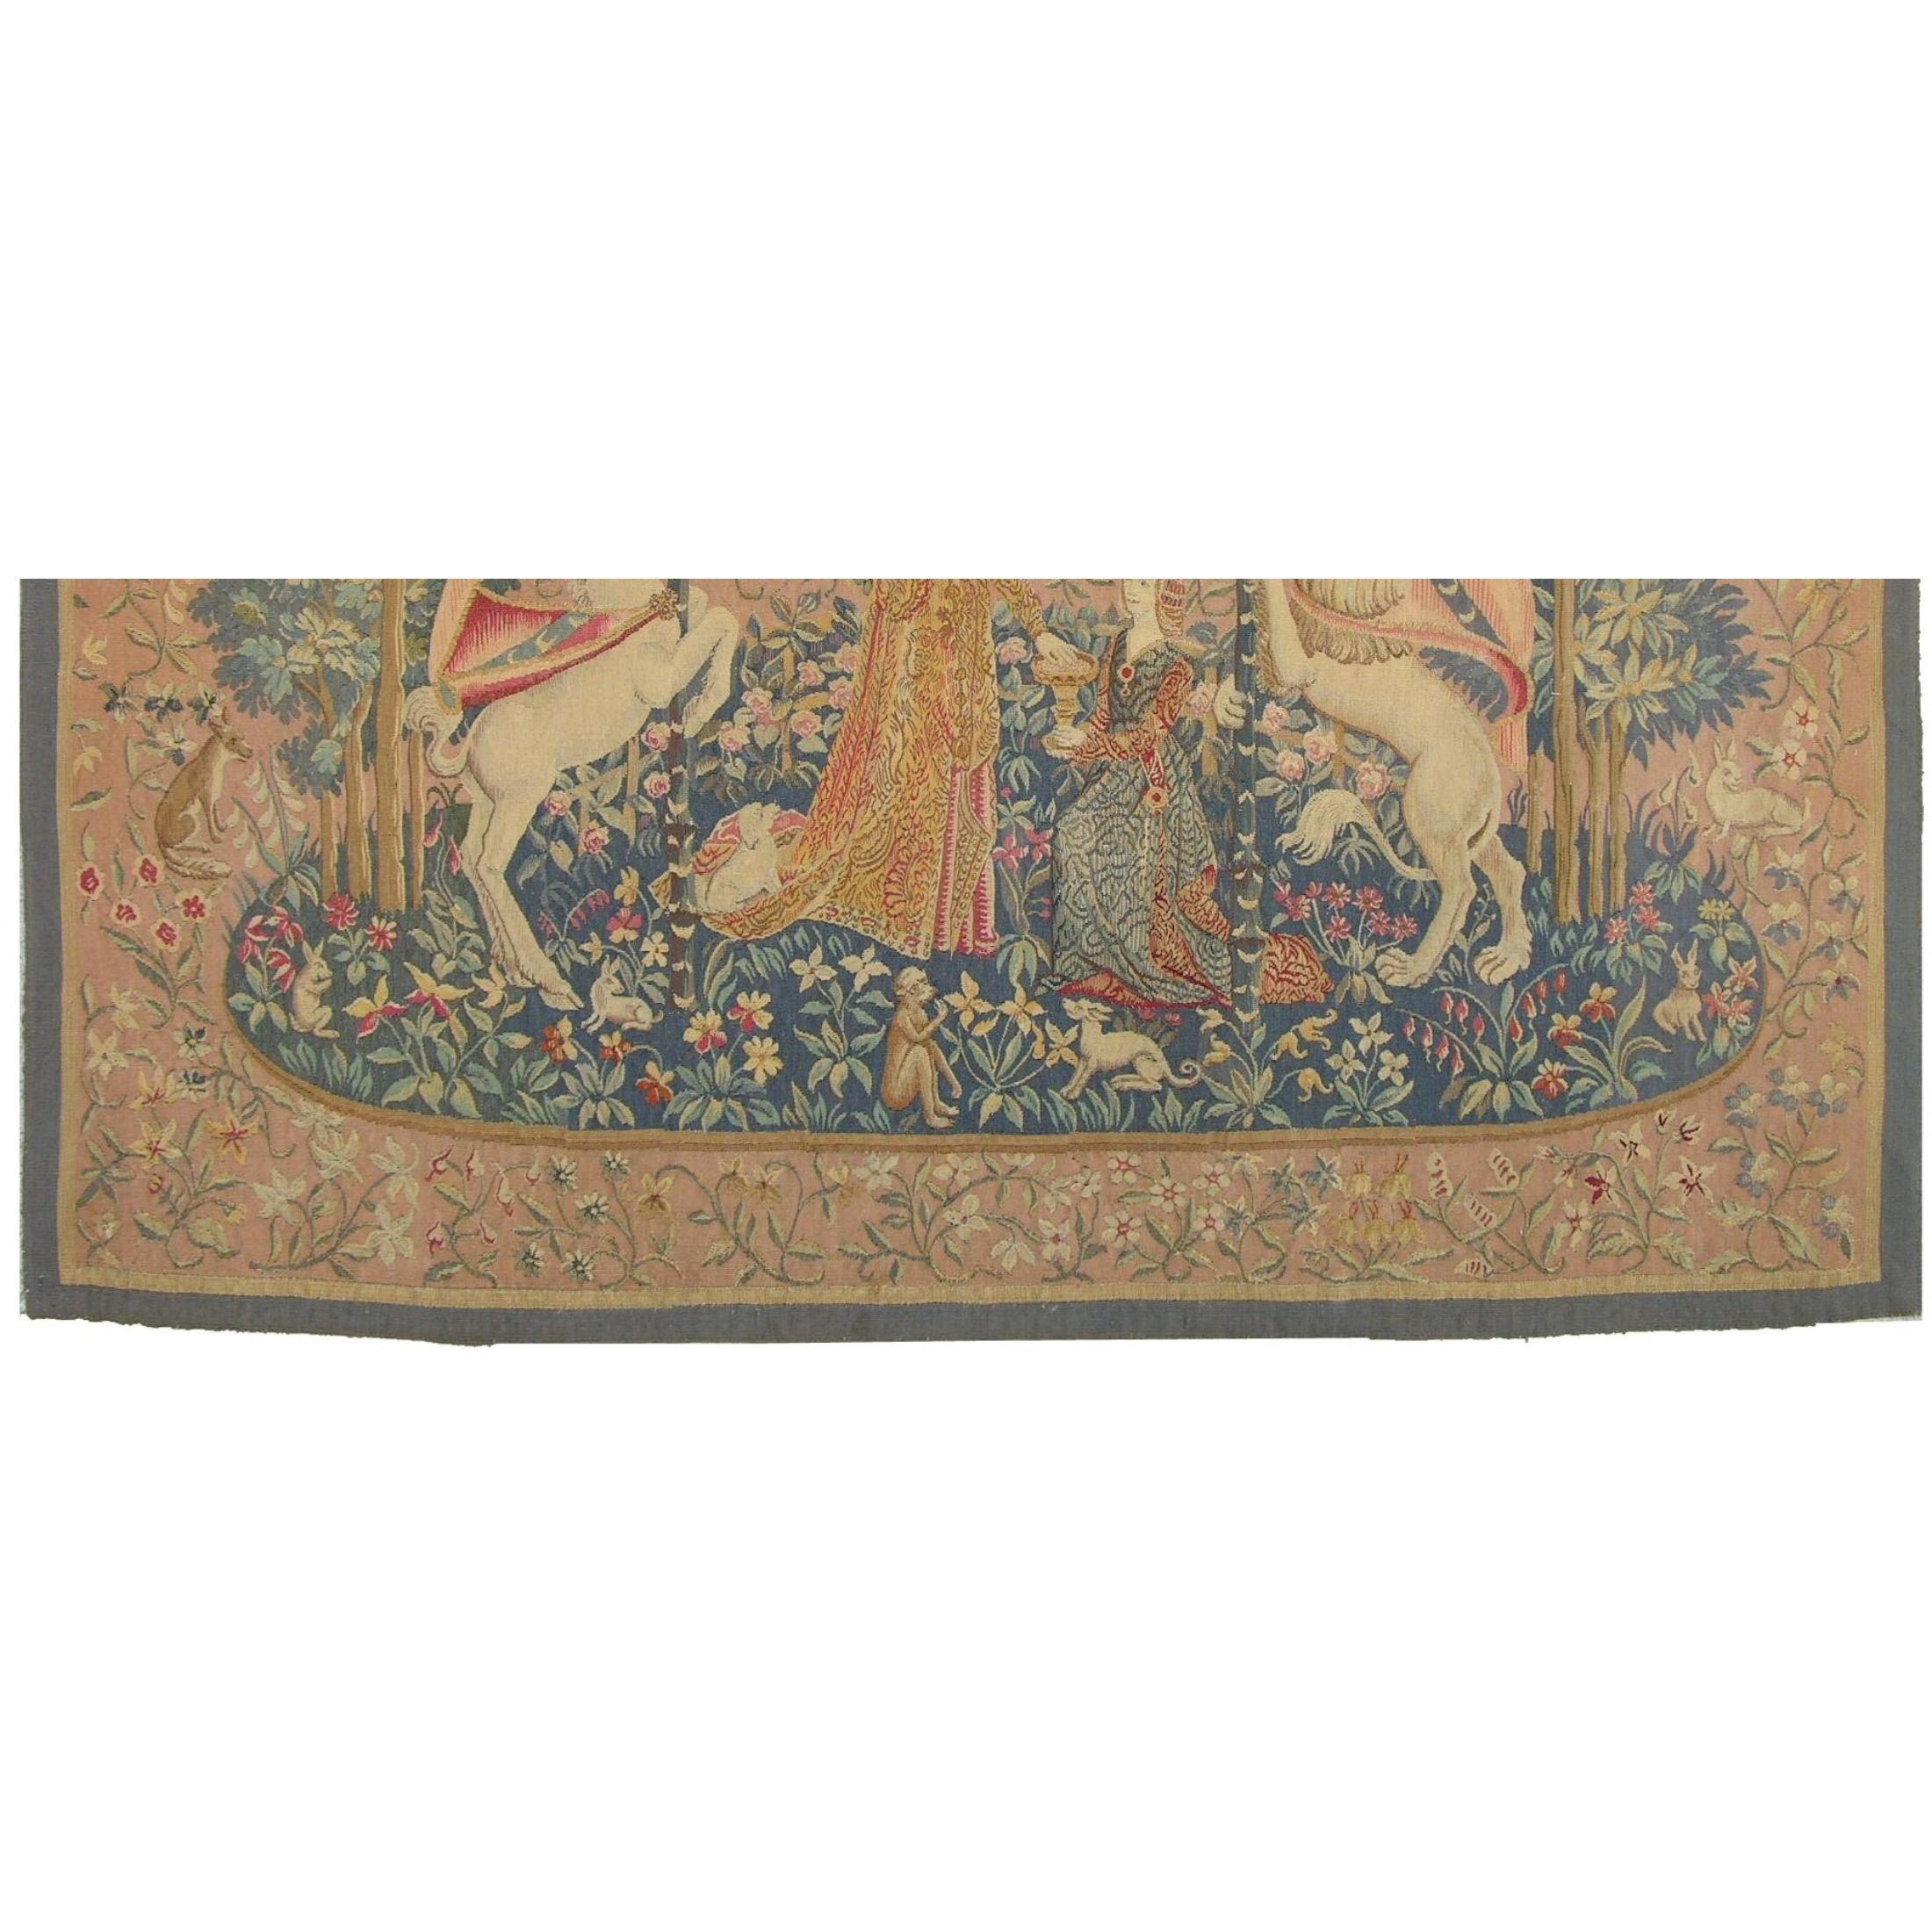 Unknown Antique Printed 1920 Tapestry 5'3